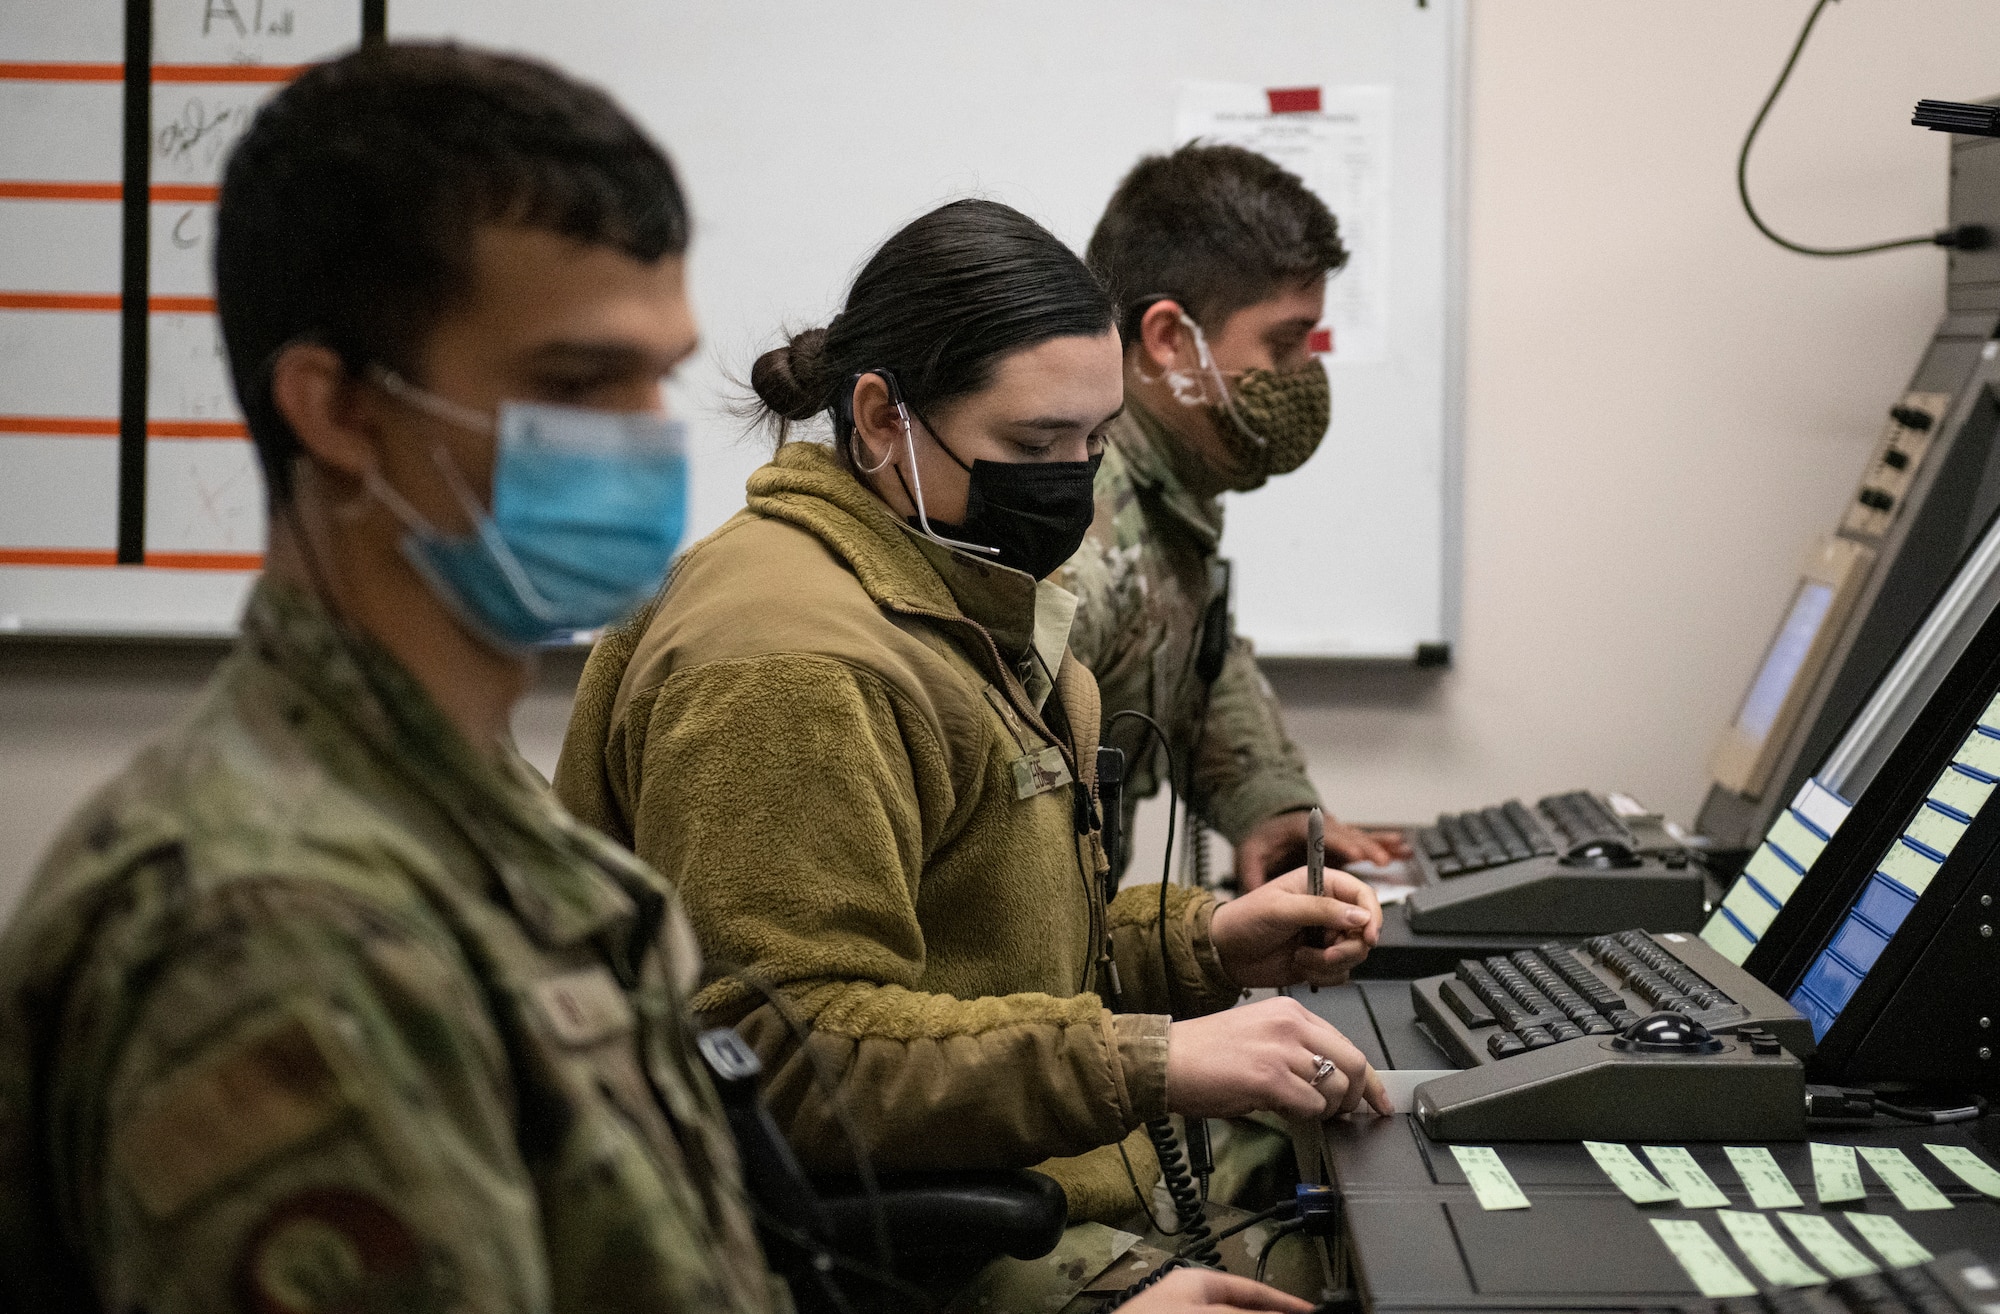 From left, Airman 1st Class Ashtan Howell, 97th Operations Support Squadron Radar Approach Control (RAPCON) air traffic controller, Airman 1st Class Linsey Beebe, 97th OSS RAPCON air traffic control apprentice, and 2nd Lt. Jorge Vazquez, 97th OSS RAPCON airfield operations trainee, view airspace radar display screens during training at Altus Air Force Base, Oklahoma, Jan. 11, 2020. Beebe and Vazquez are in the process of completing their year-long training to become certified air traffic controllers. (U.S. Air Force photo by Senior Airman Breanna Klemm)